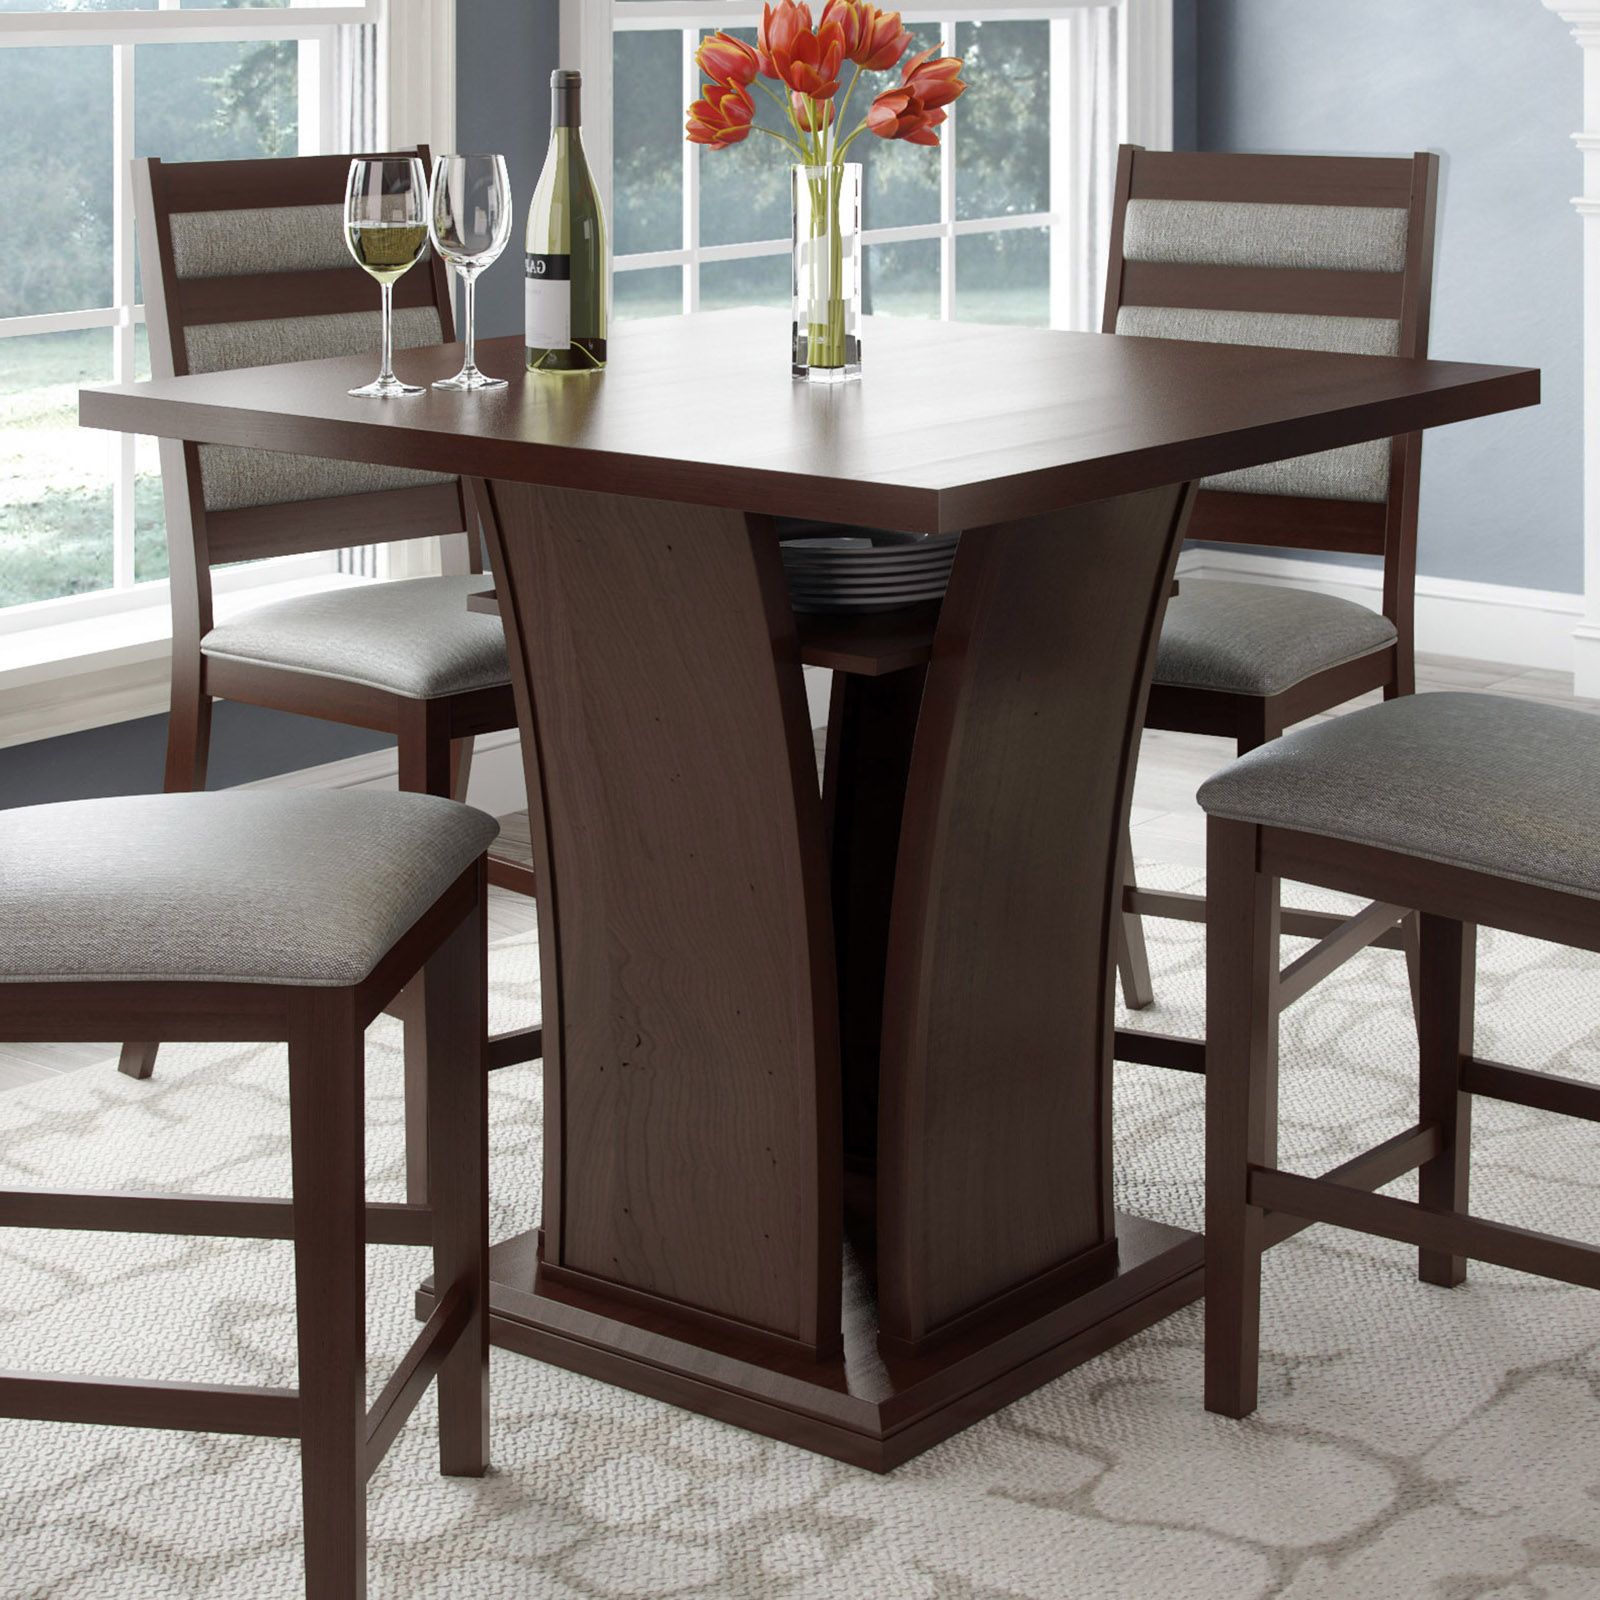 Andrelle Bar Height Pedestal Dining Tables With Regard To Popular Corliving Bistro Counter Height Dining Table With Curved (View 4 of 20)